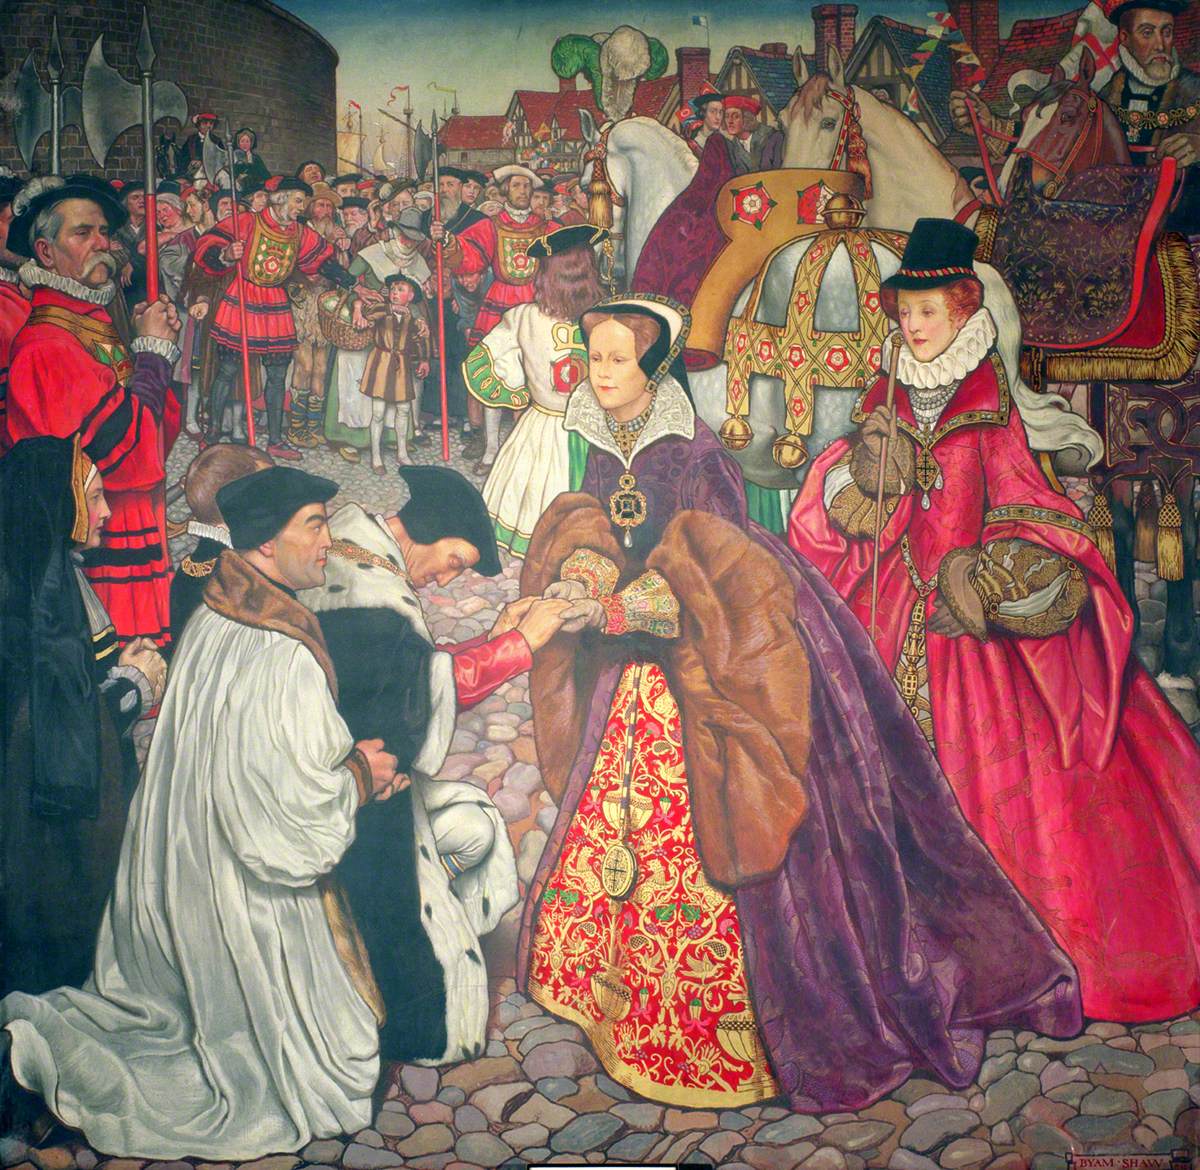 The Entrance of Mary I with Princess Elizabeth into London, 1553